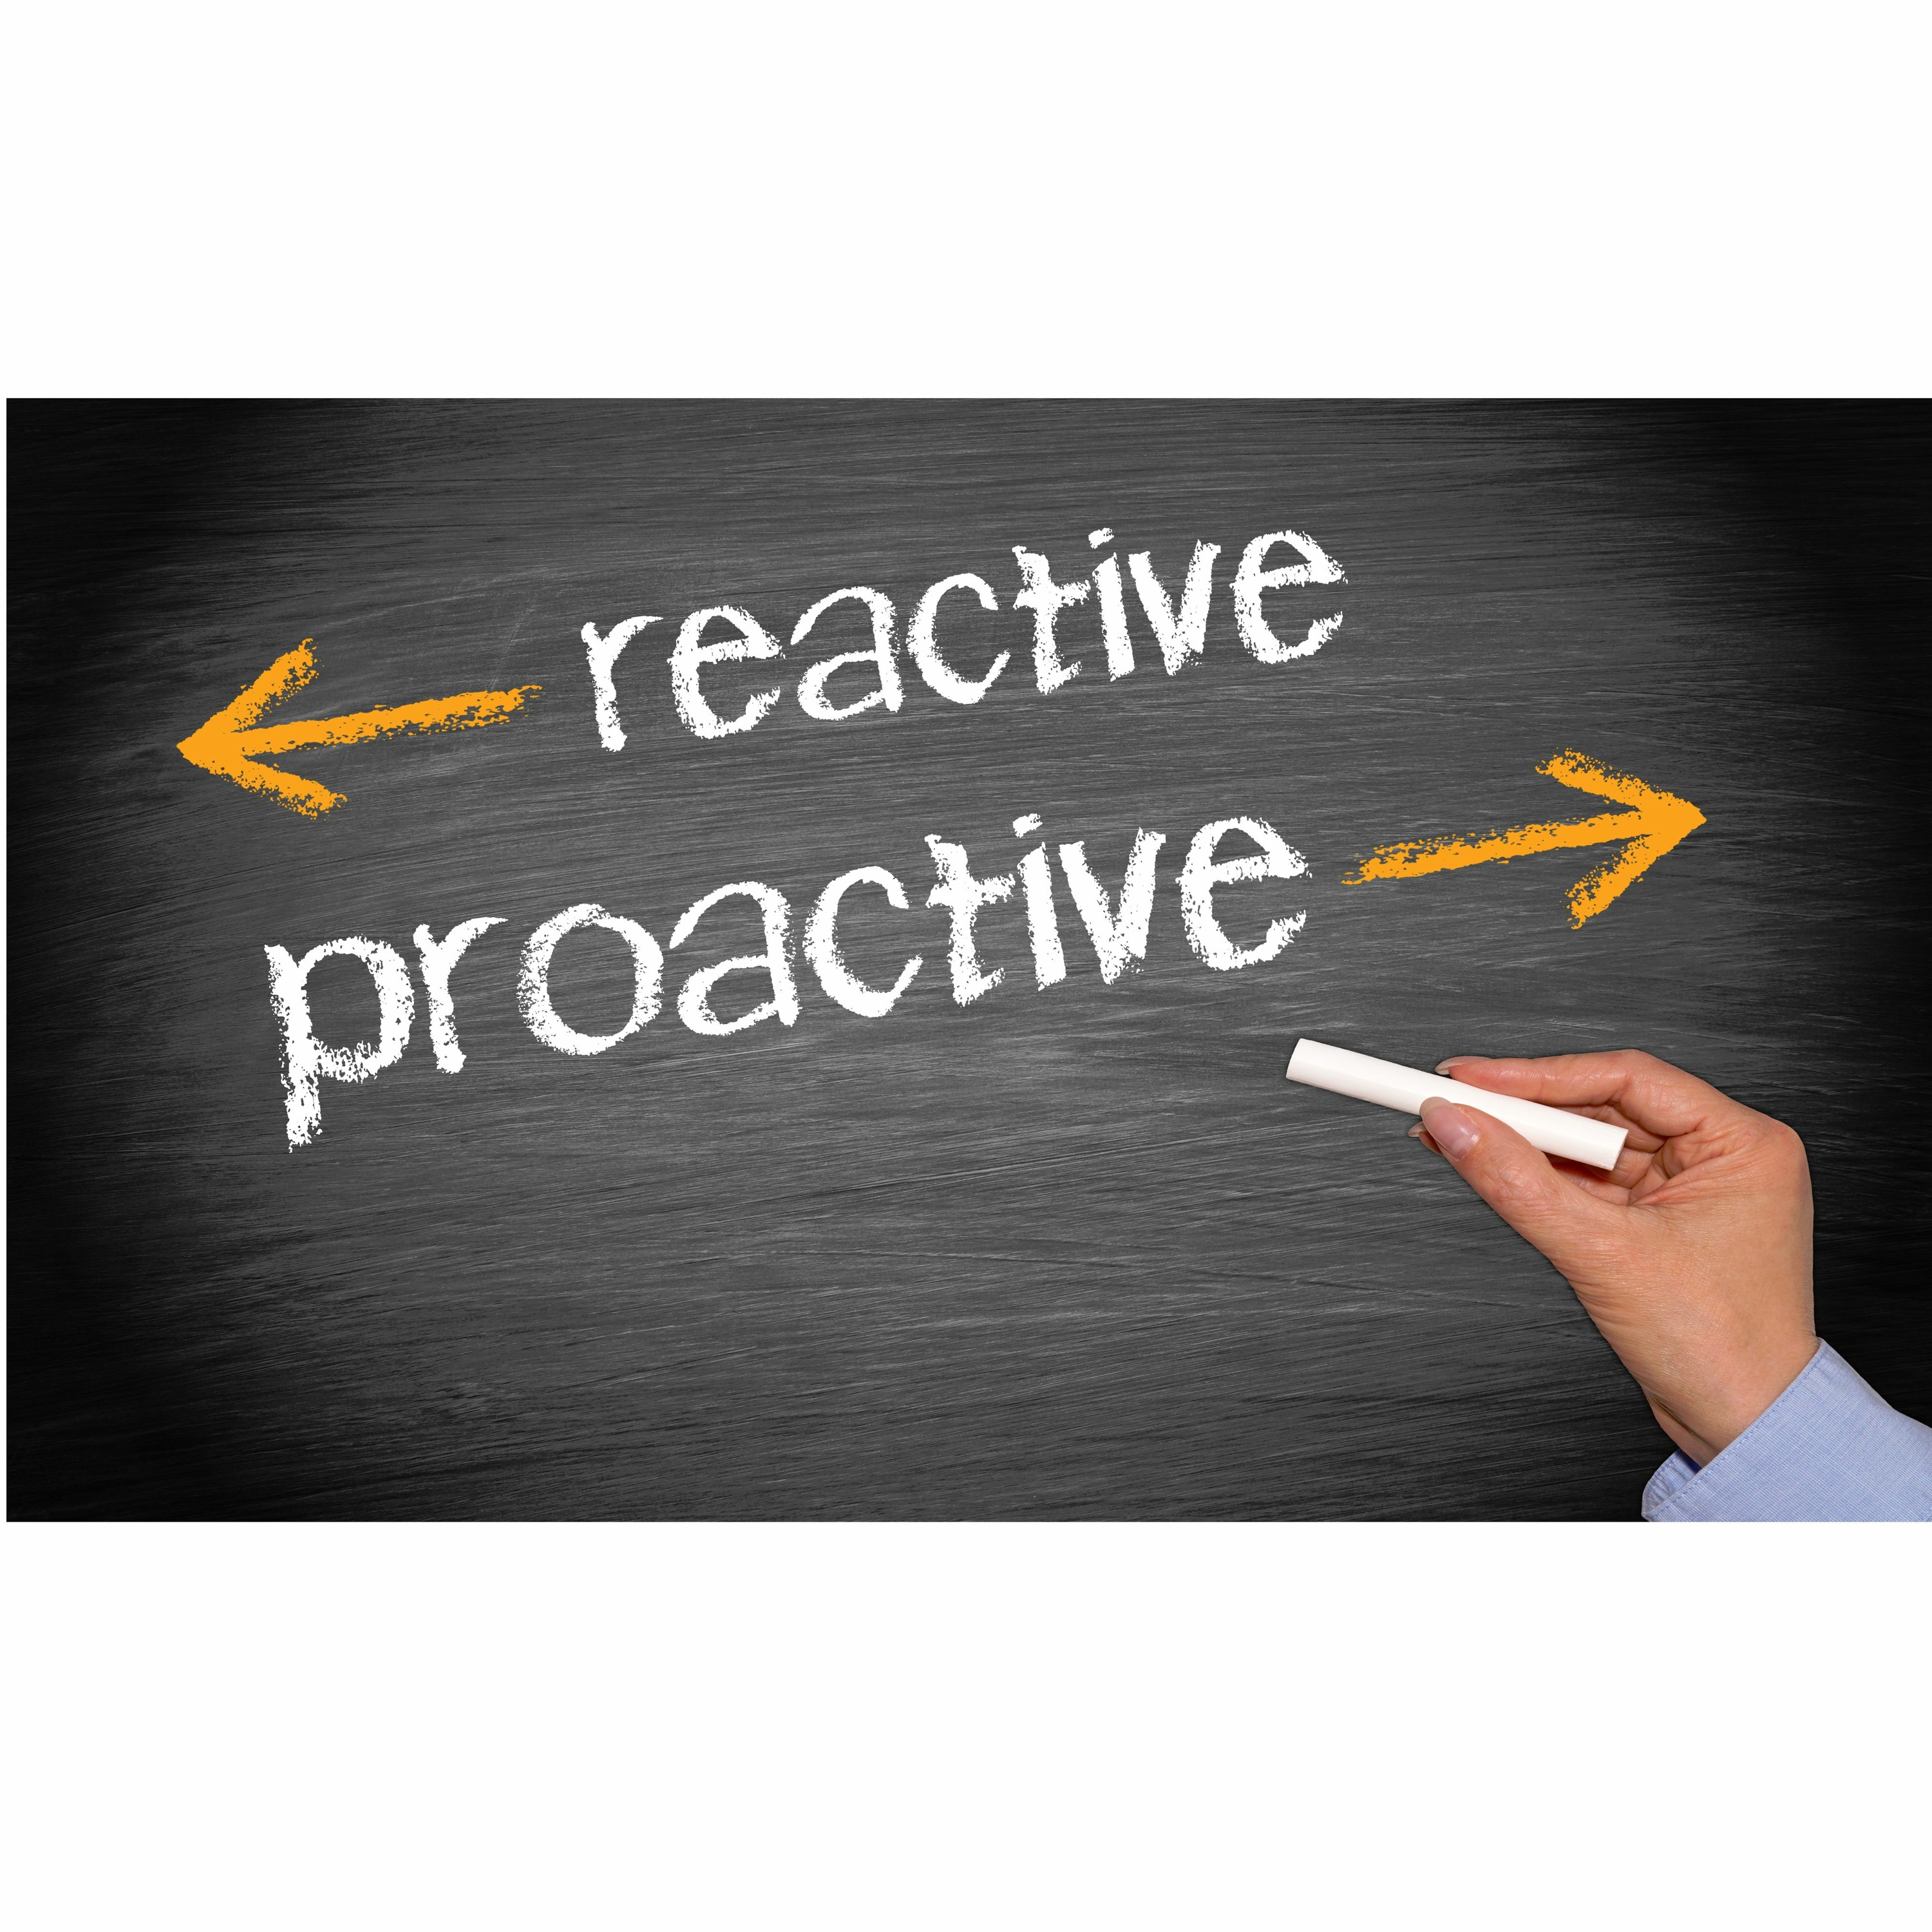 How to Be Proactive not Reactive in Your Training